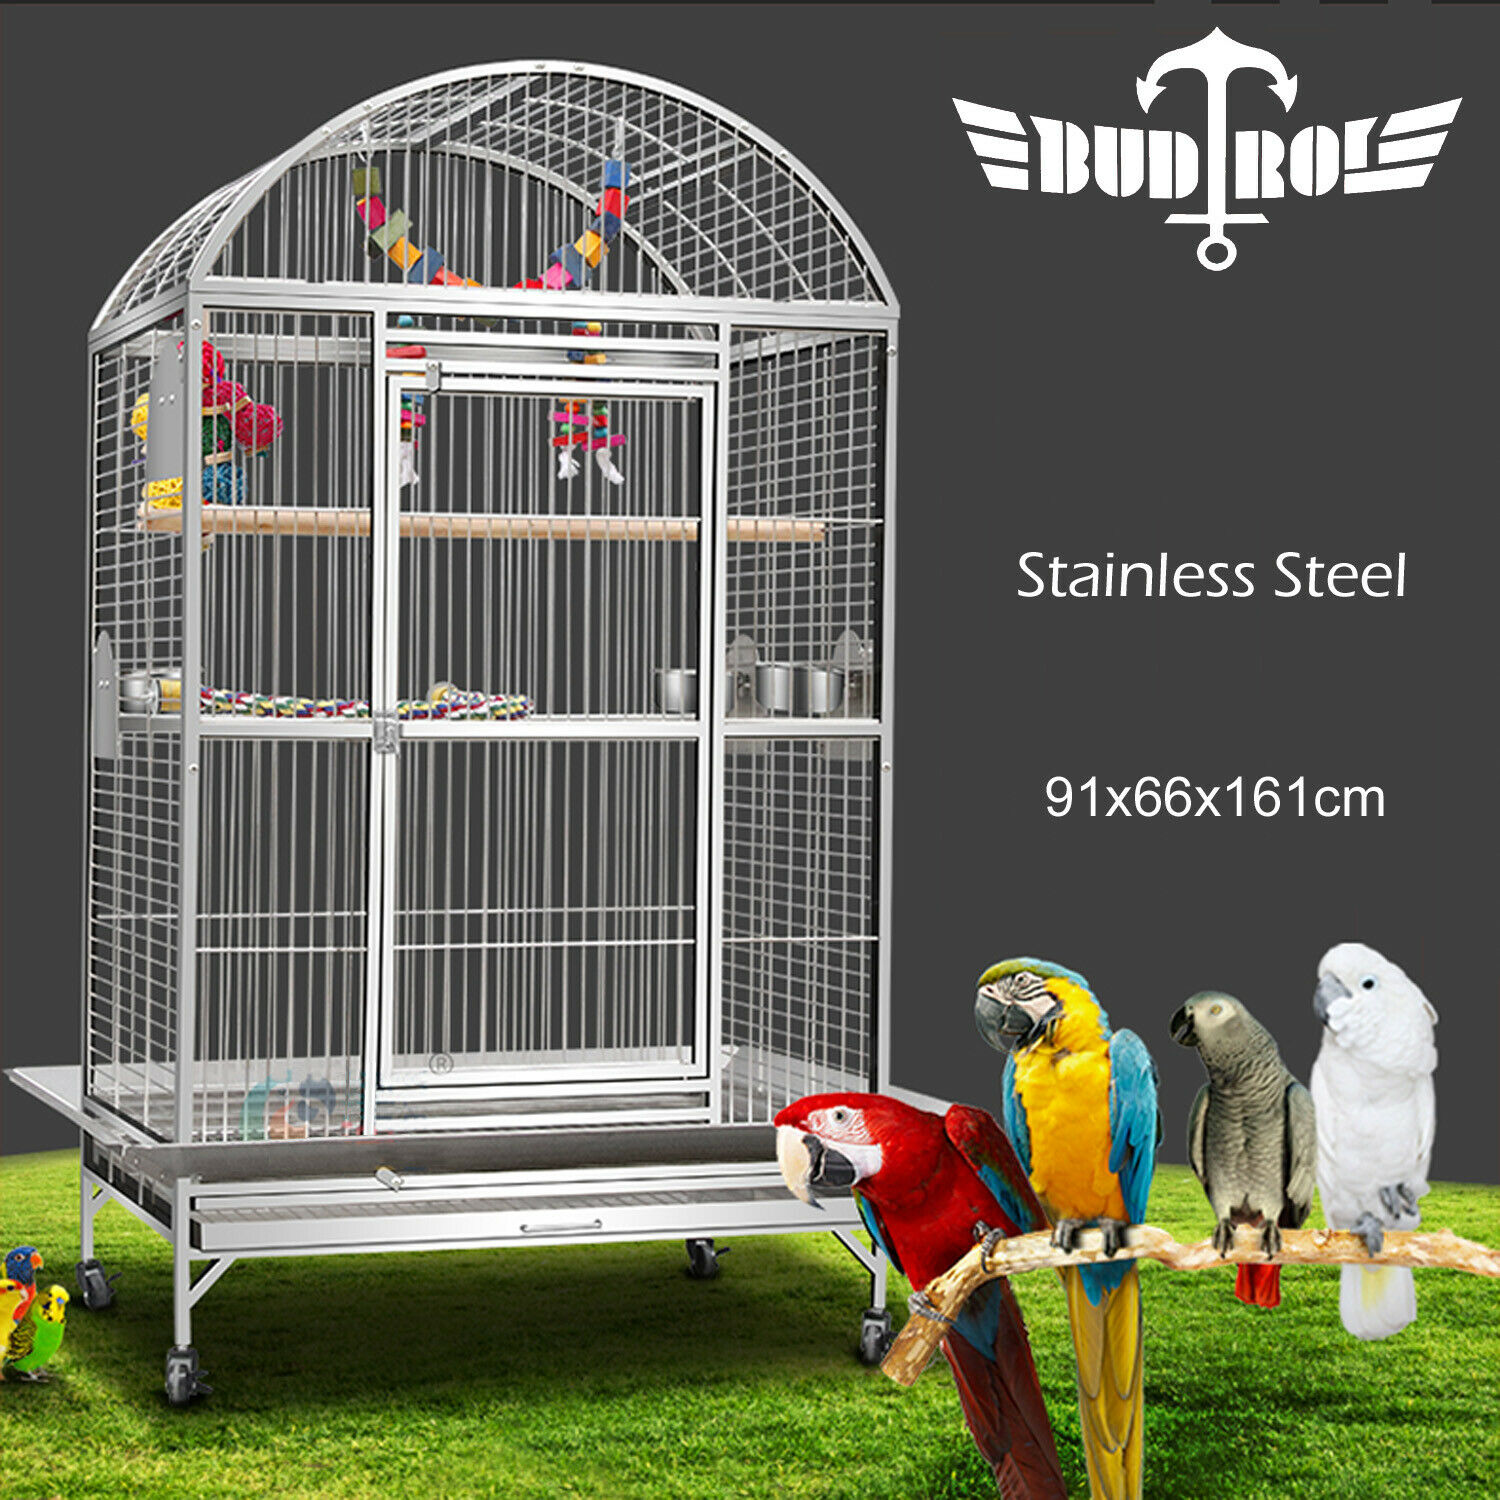 Supreme 161Cm Stainless Steel Parrot Aviary Bird Cage Perch On Wheels |  Budtrol